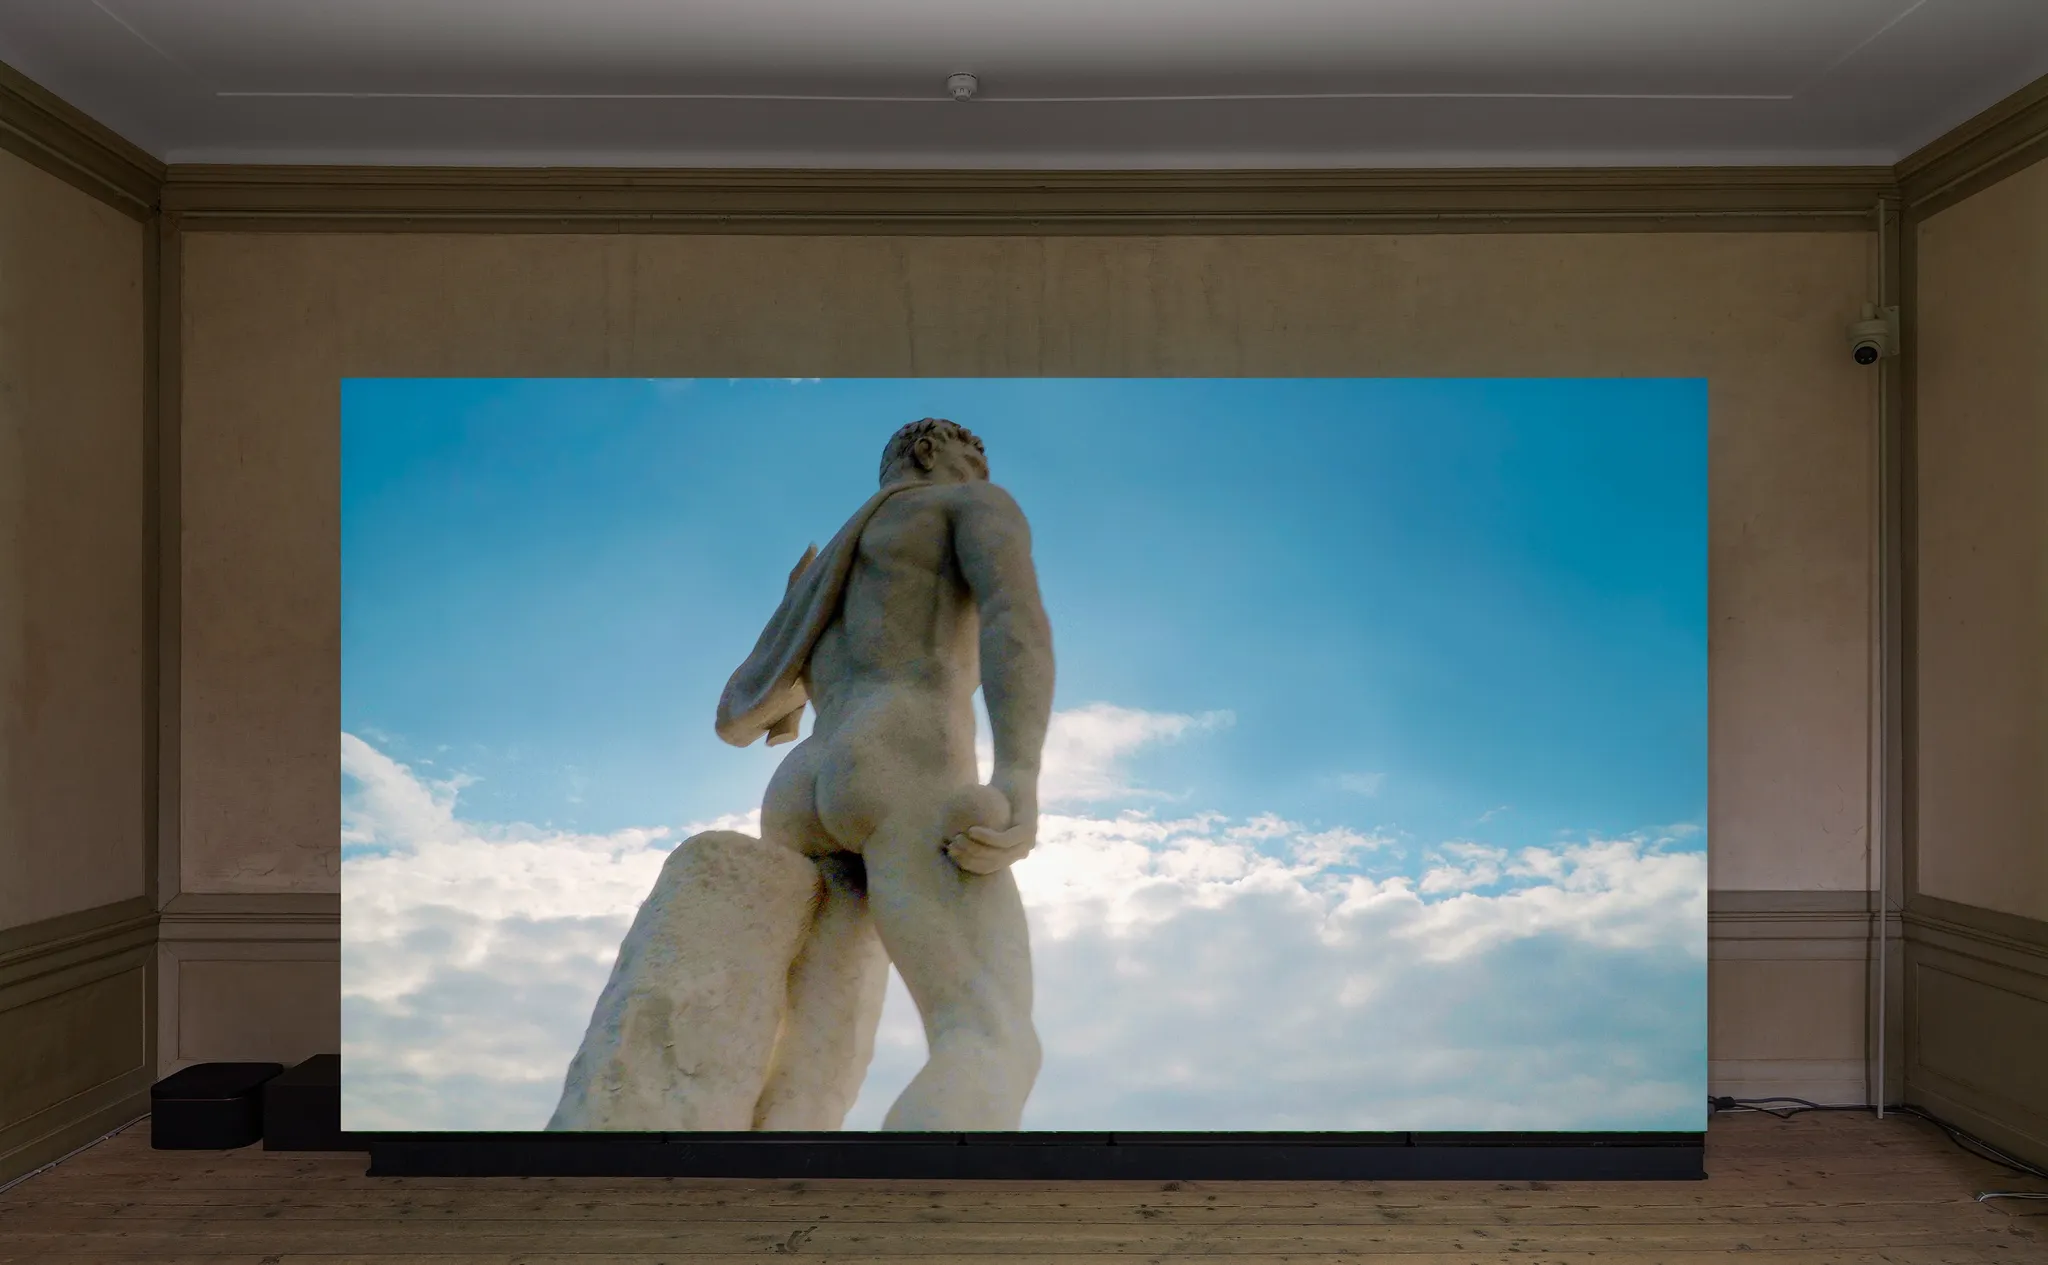 Video on a large screen depicting the backside of a tall classical statue of the Stadio dei Marmi in front of a blue, partly cloudy sky